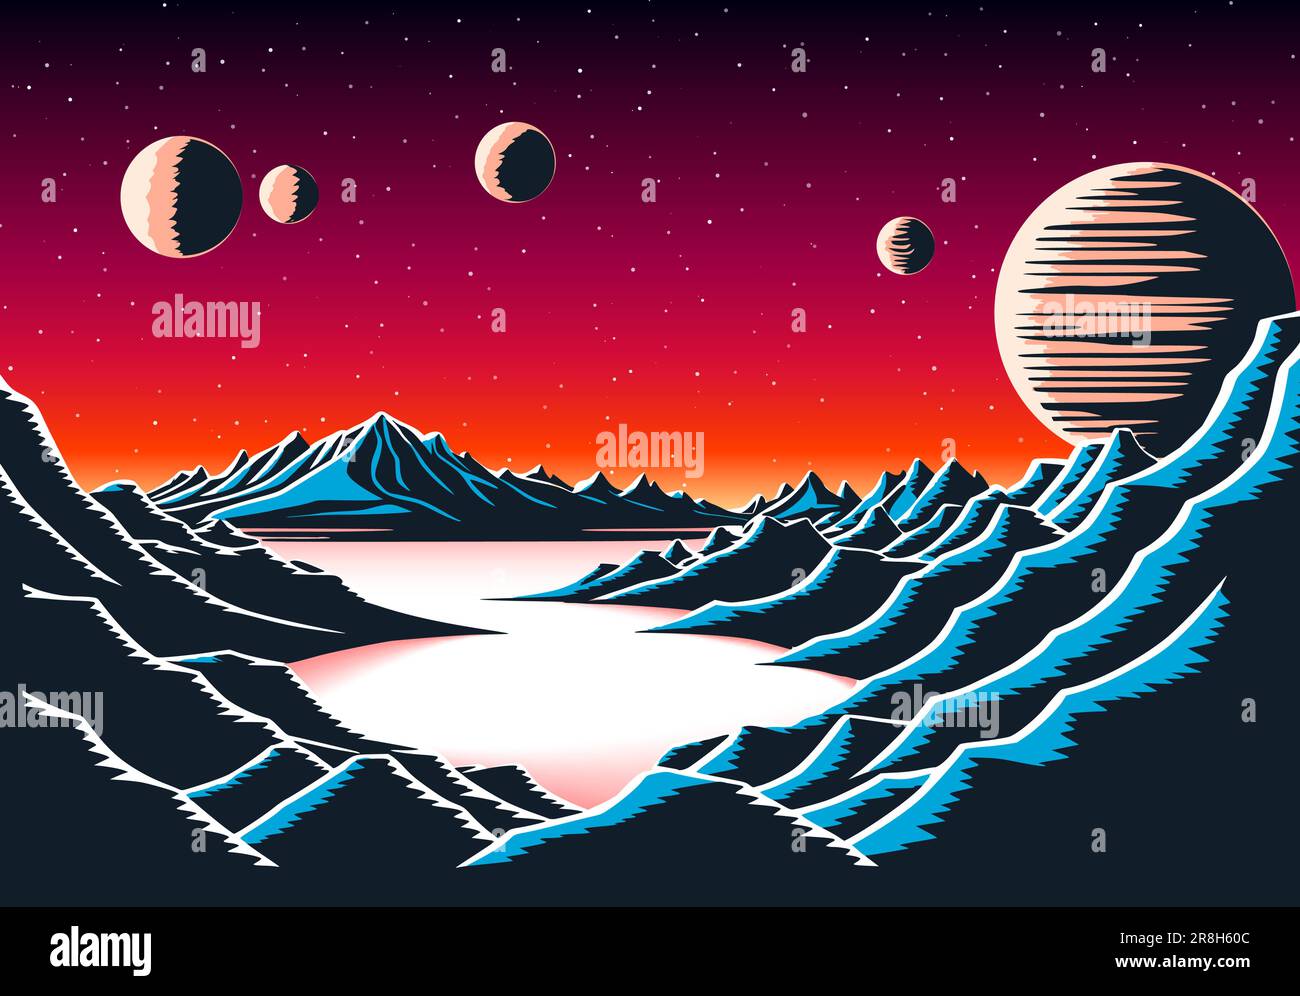 Landscape with human looking at horizon with mountains, sci-fi scene on far plane with moonst. Retro futuristic landscape in 80s atomic era style. Stock Vector